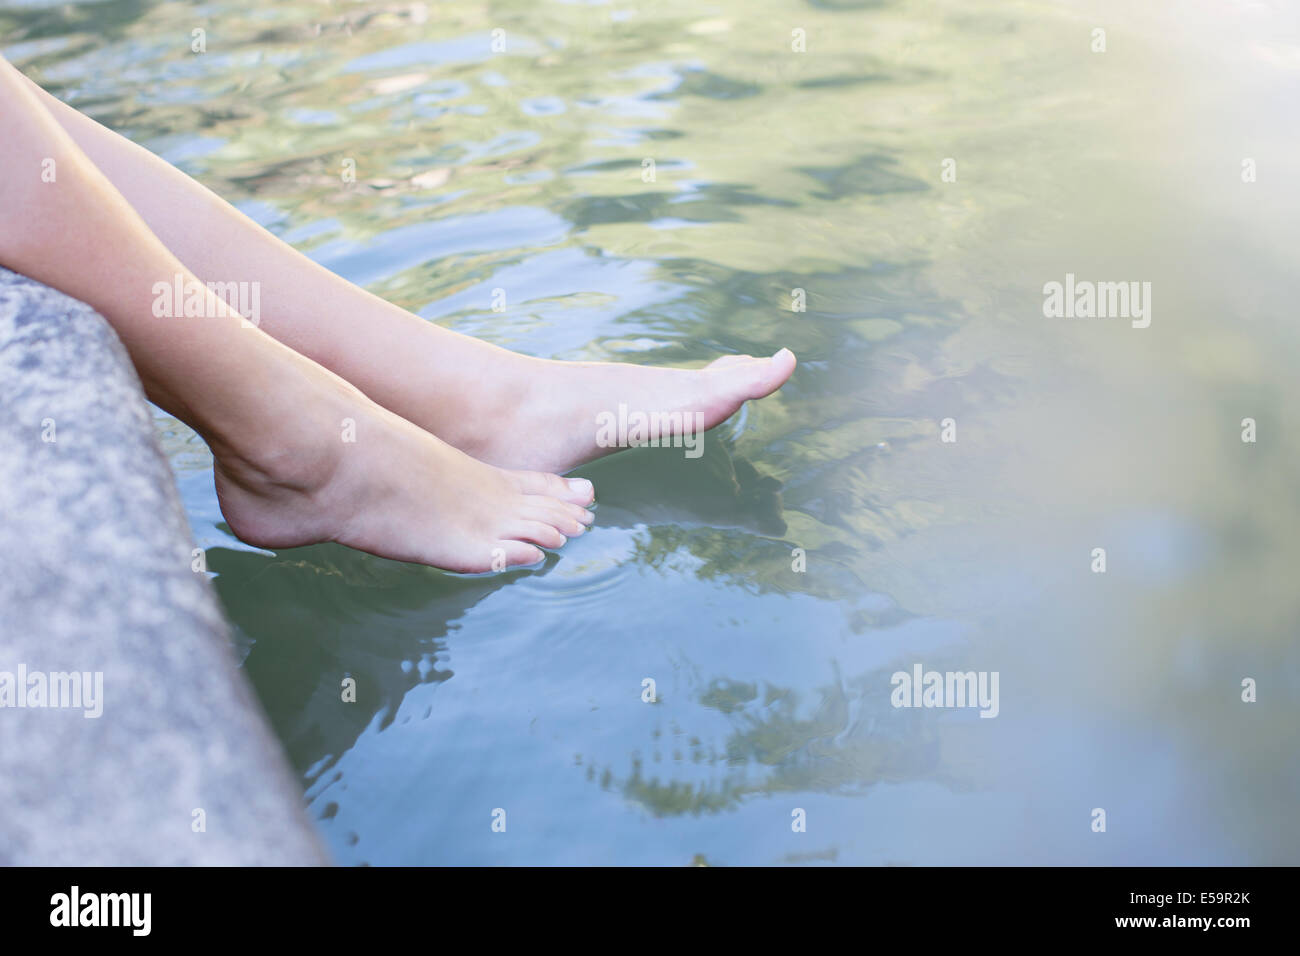 Woman dipping feet in pond Stock Photo